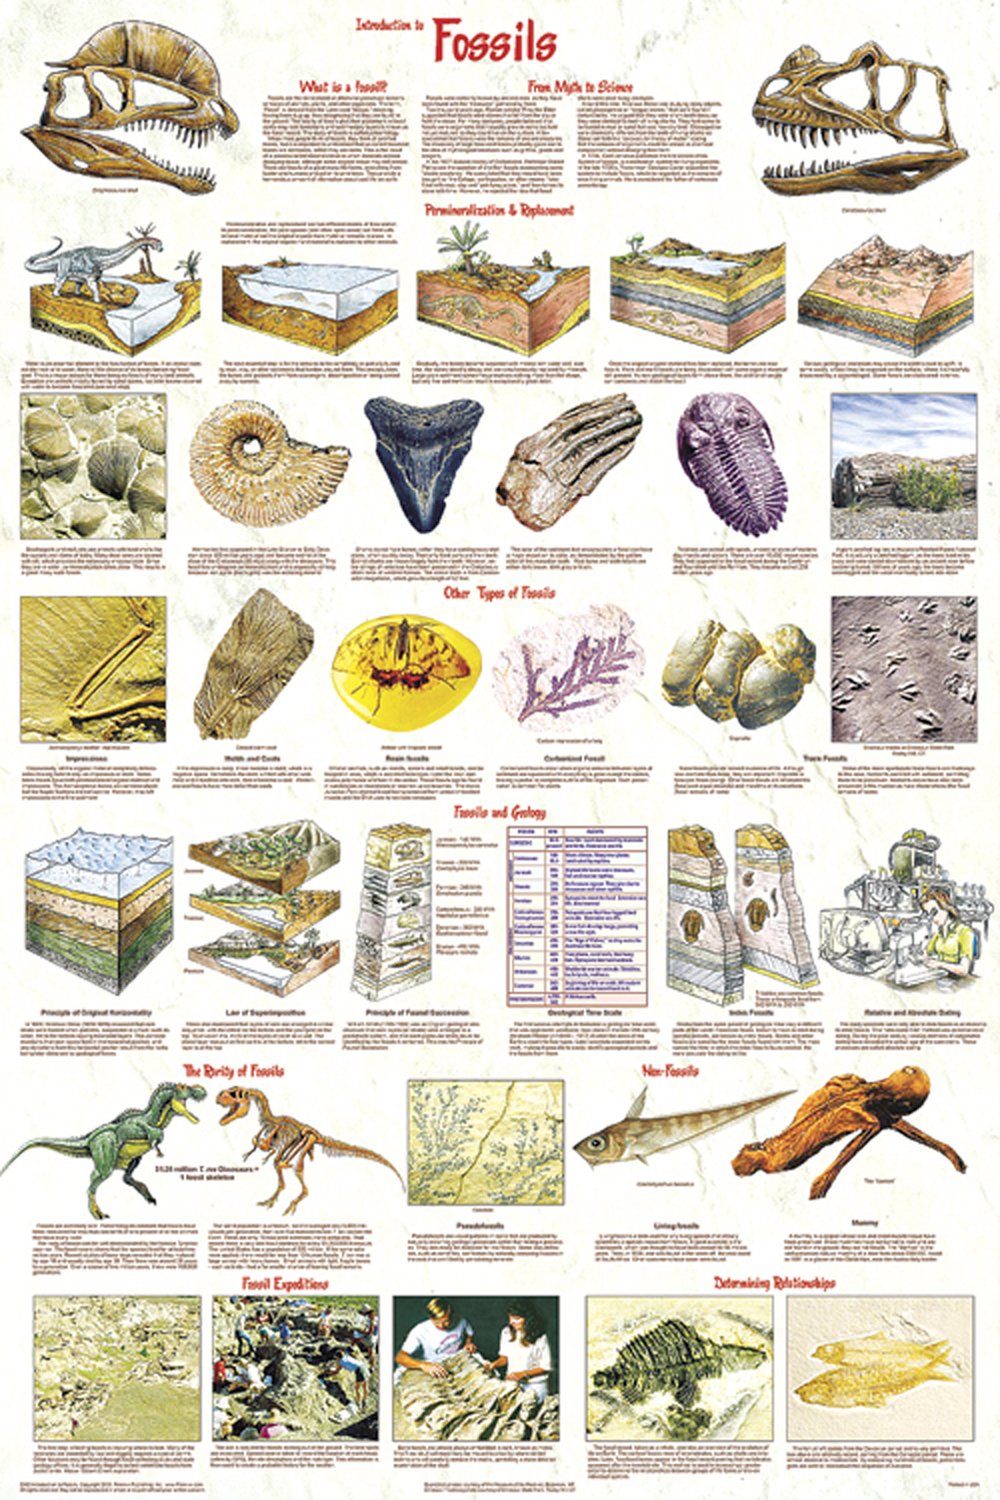 Fossils (Laminated Poster)